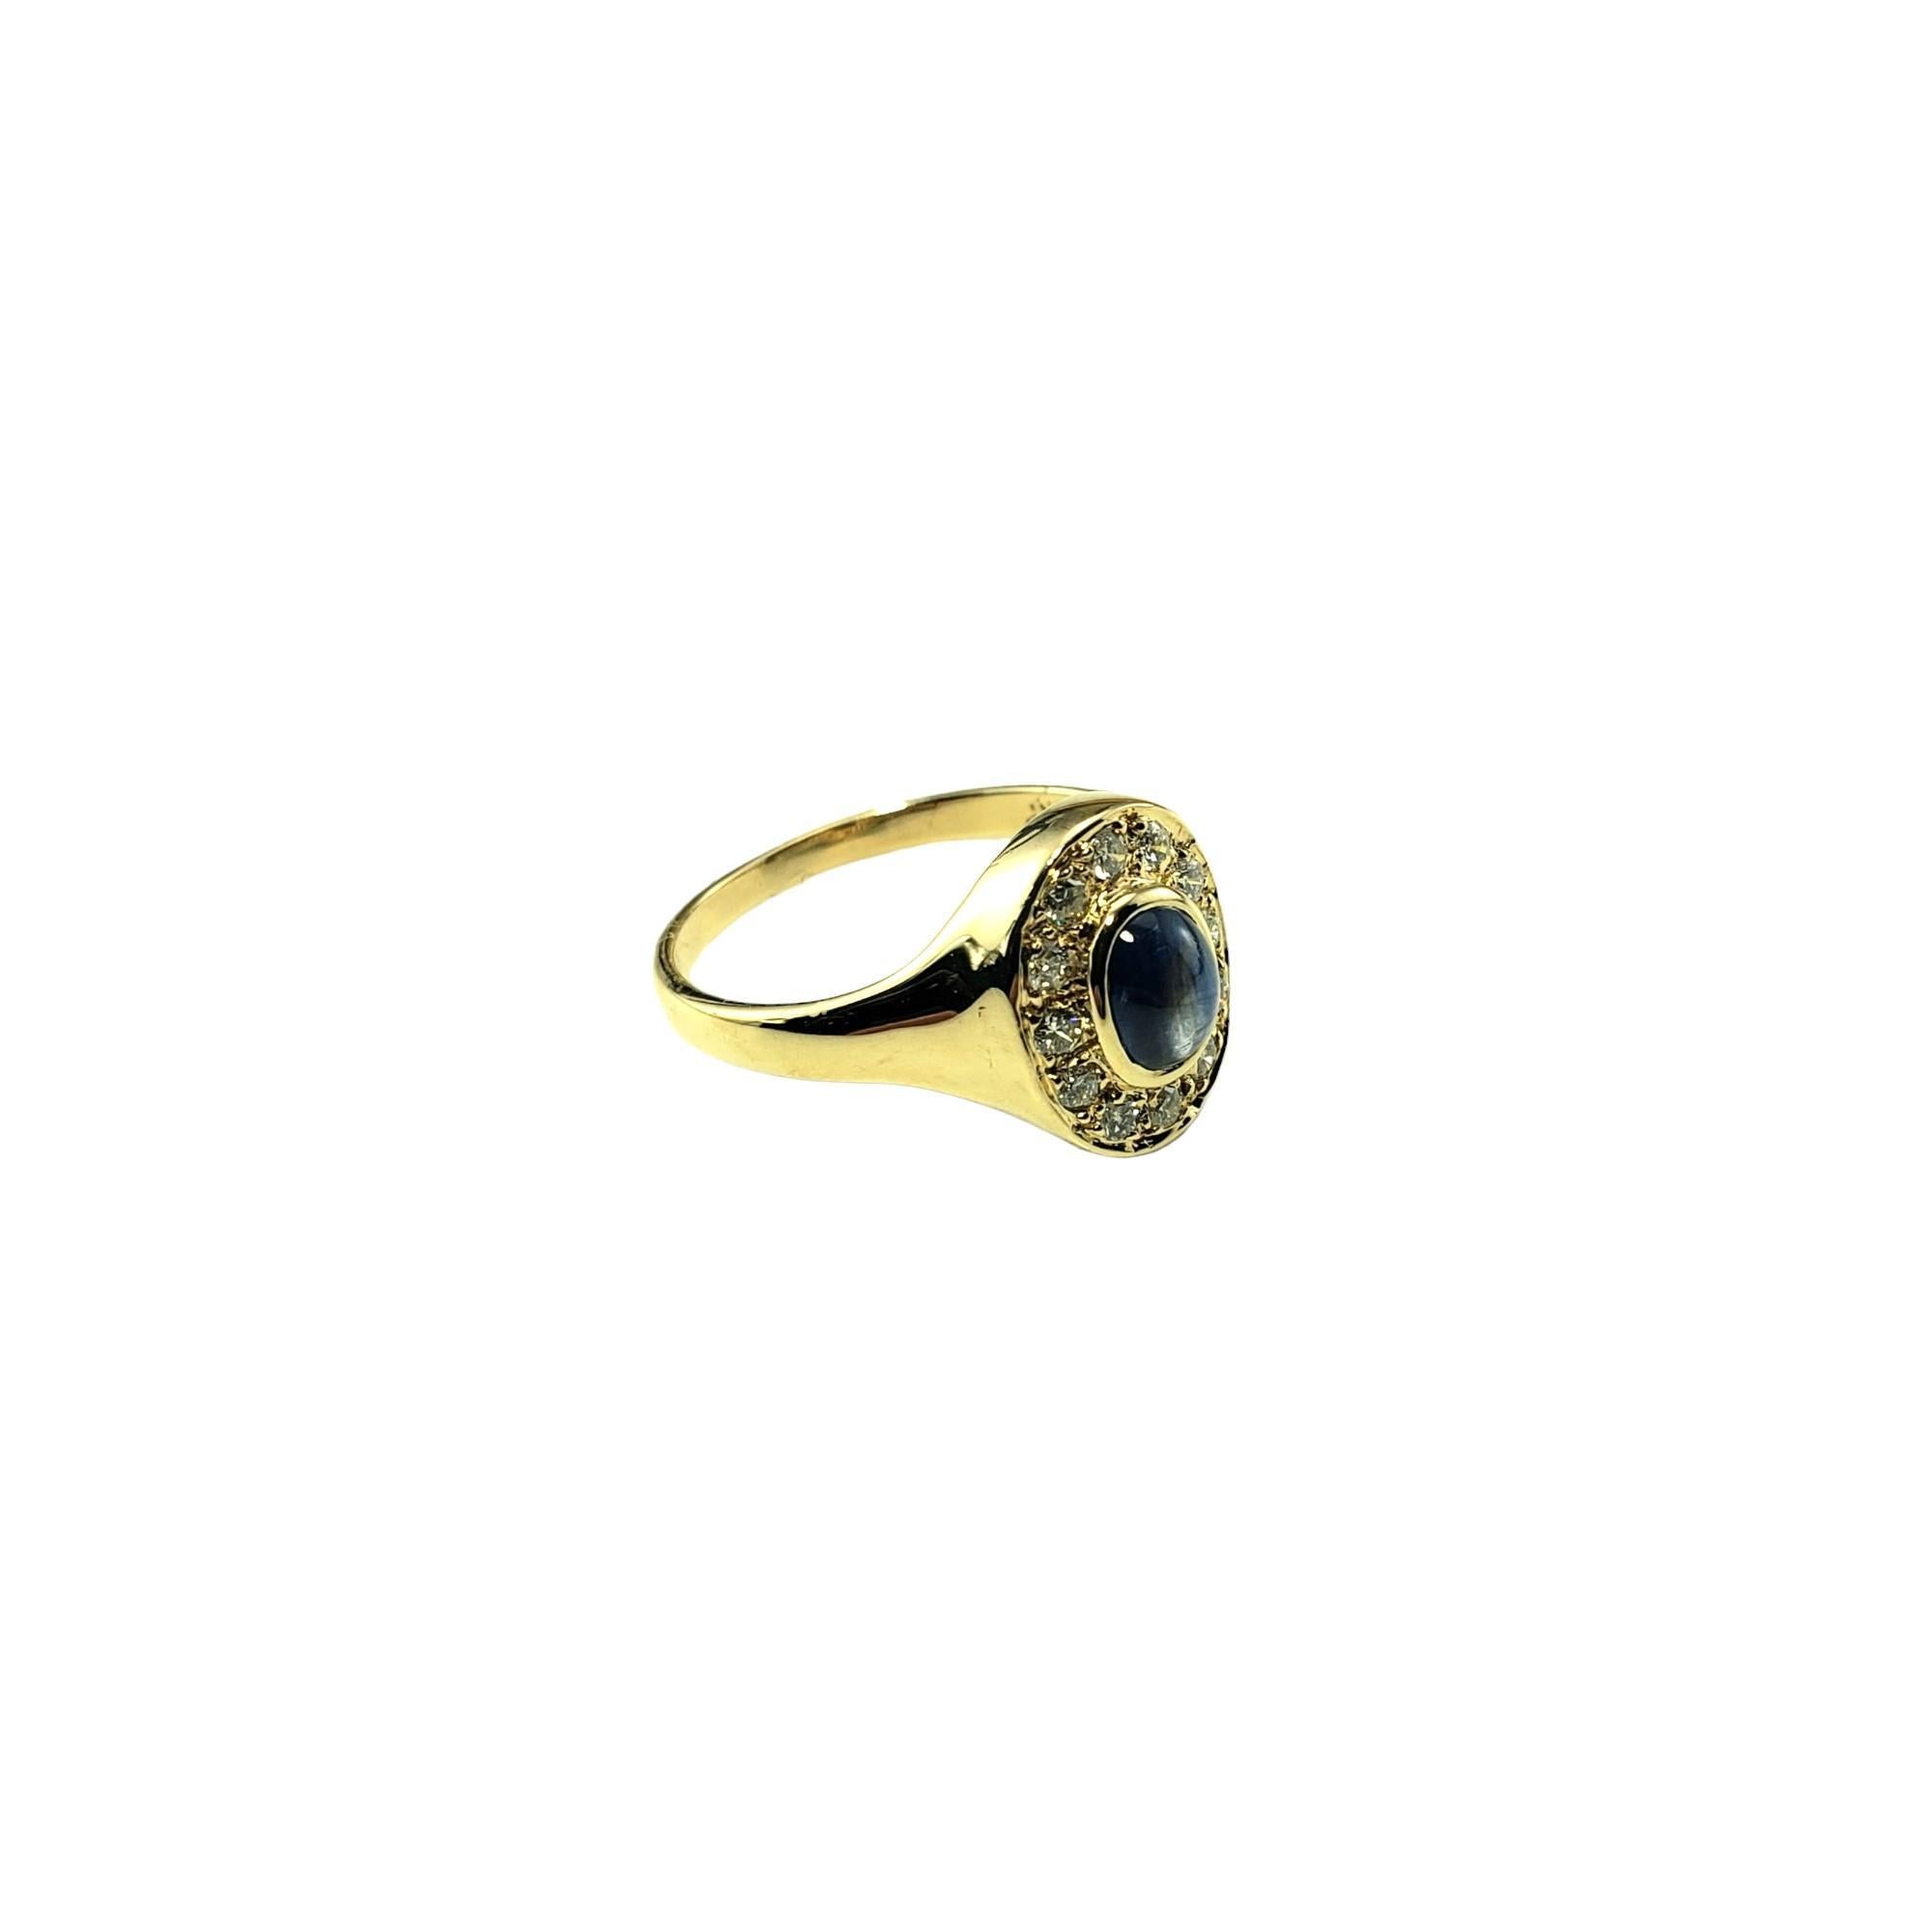 Cabochon 14K Yellow Gold Sapphire & Diamond Ring Size 6.25 #15729 For Sale